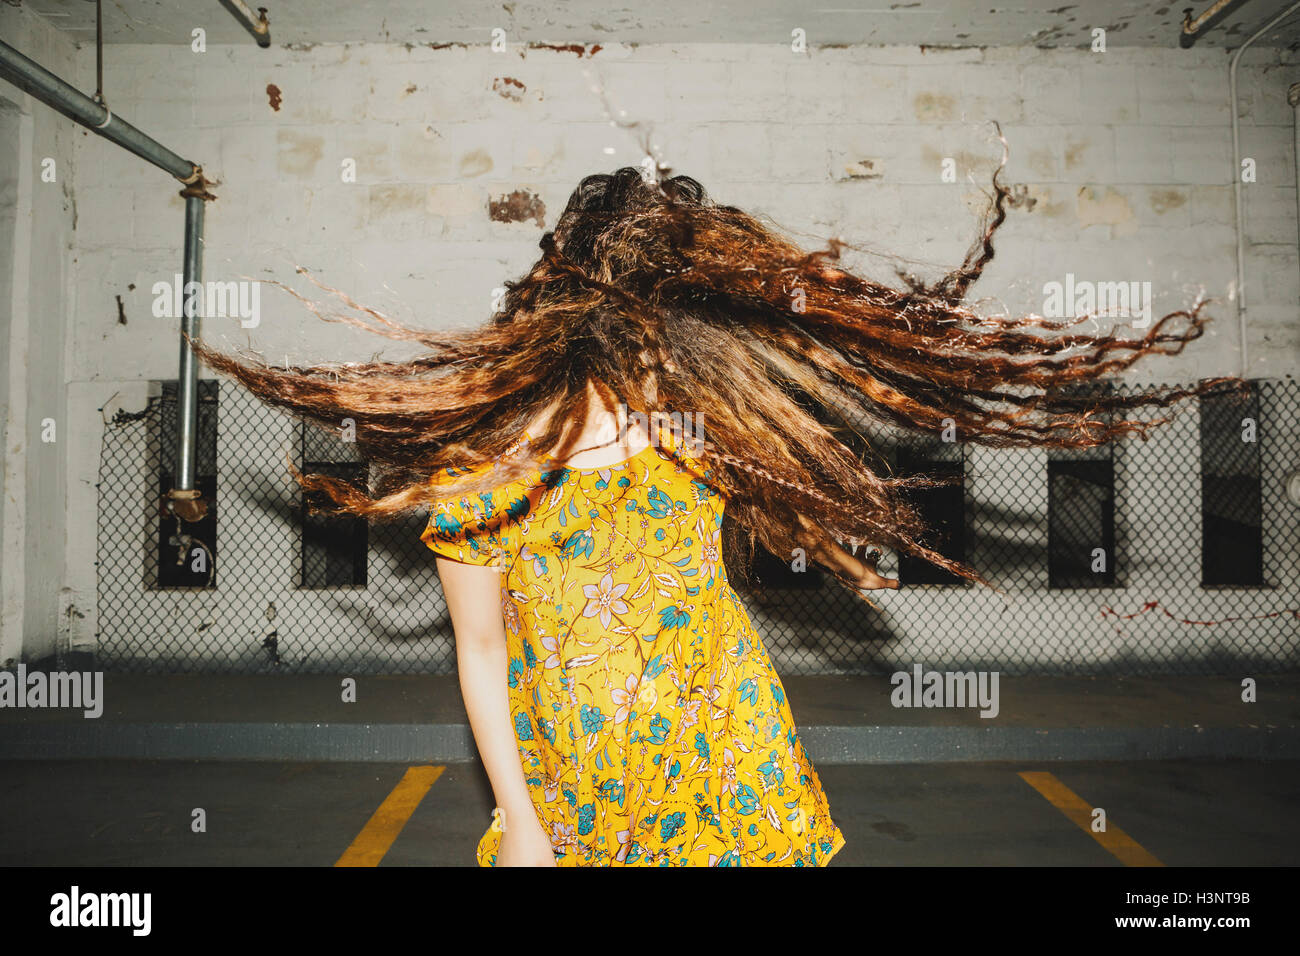 Front view of young woman shaking her long wavy hair in indoor carpark Stock Photo